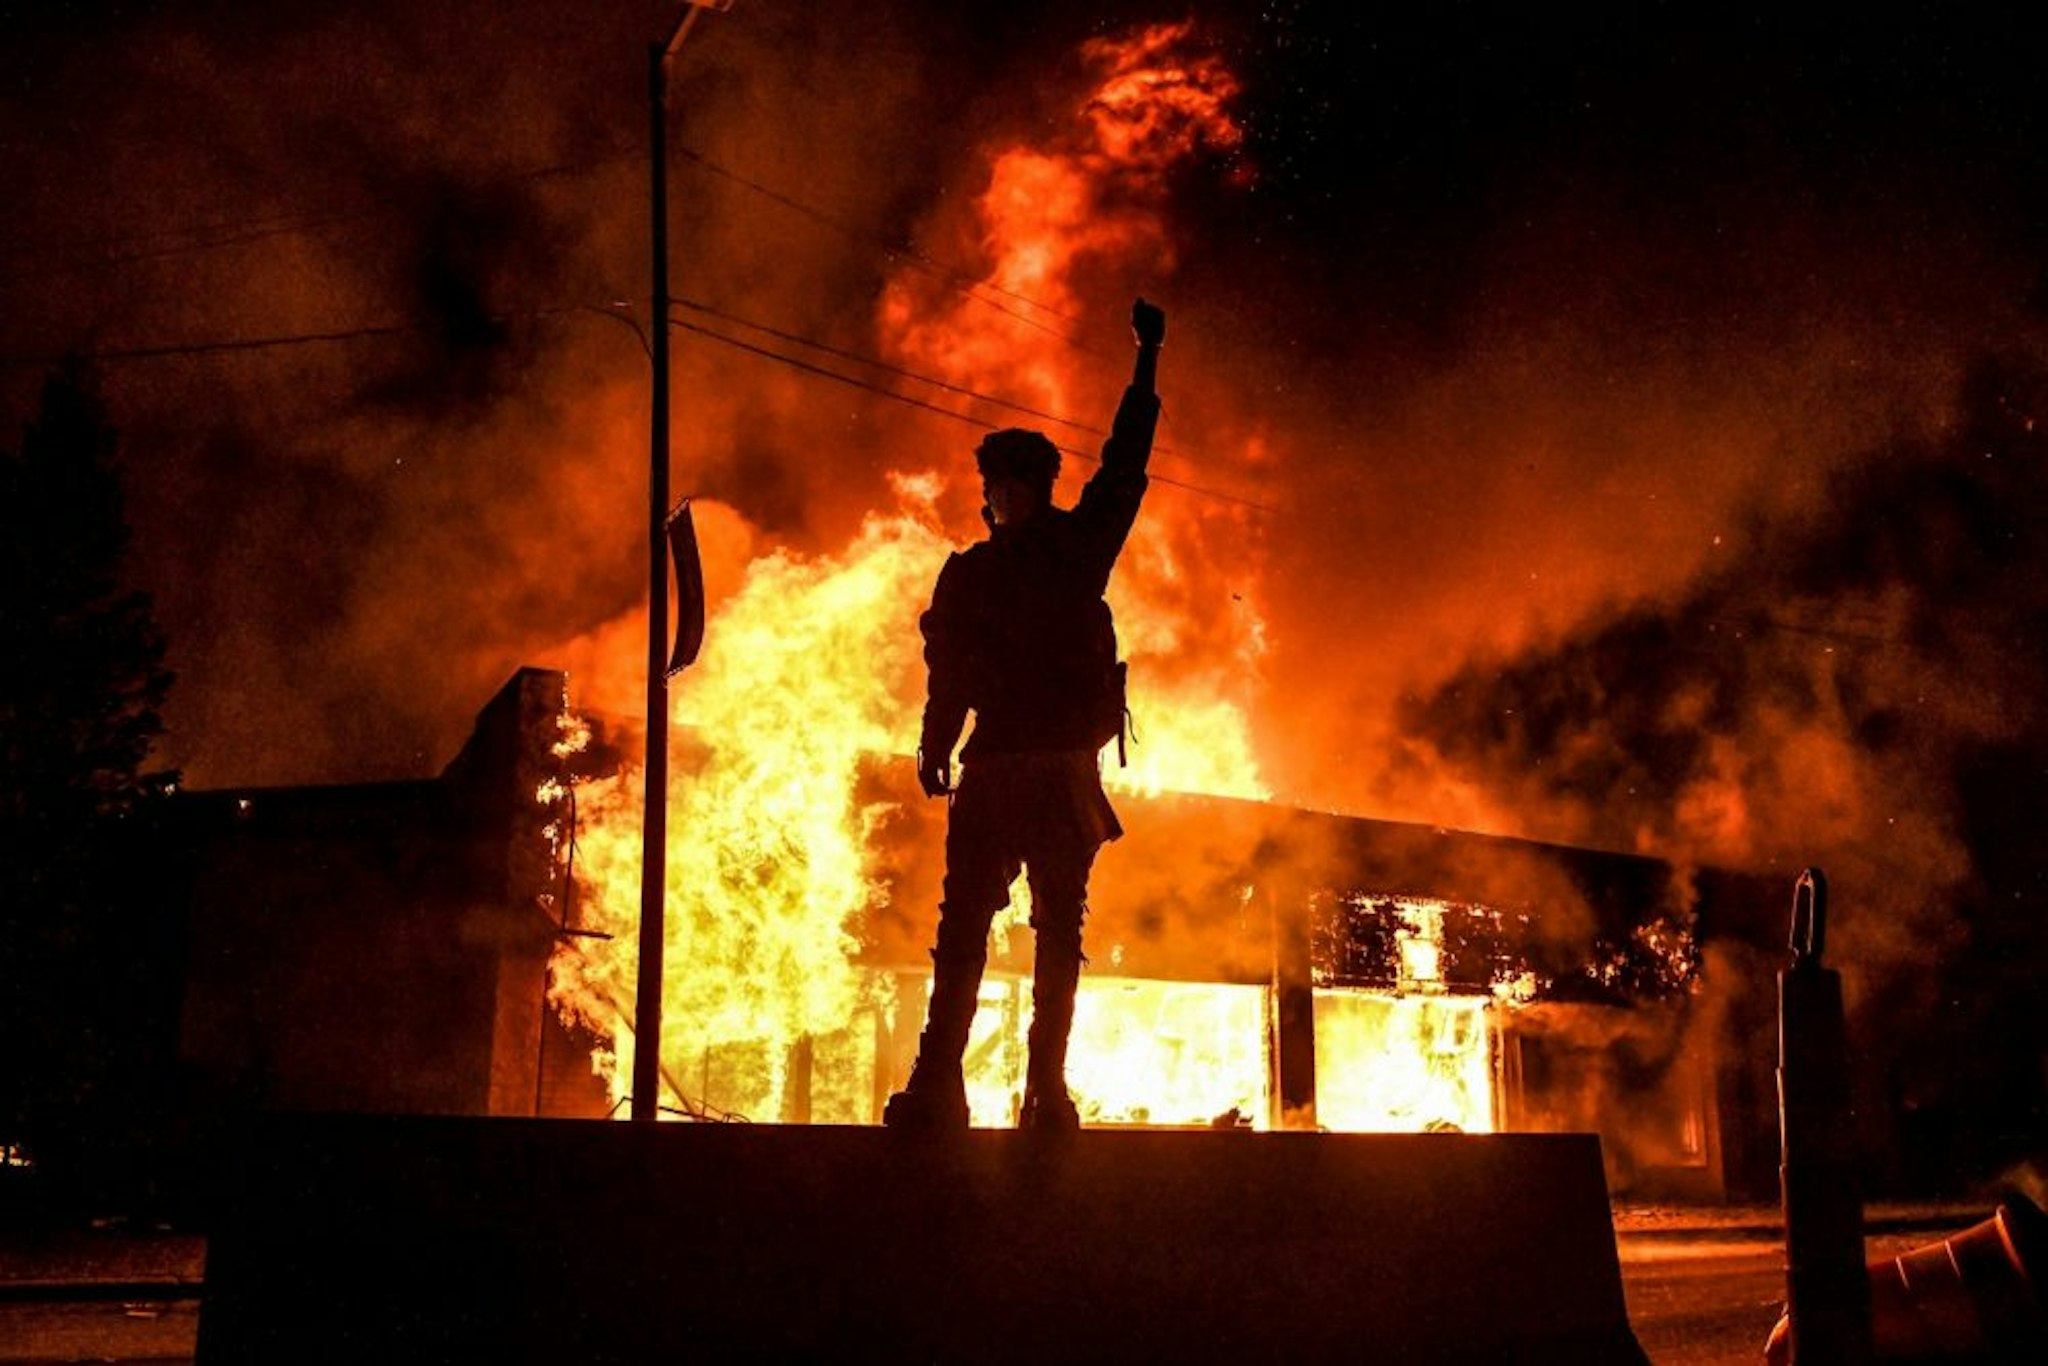 TOPSHOT - A protester reacts standing in front of a burning building set on fire during a demonstration in Minneapolis, Minnesota, on May 29, 2020, over the death of George Floyd, a black man who died after a white policeman kneeled on his neck for several minutes. - Violent protests erupted across the United States late on May 29 over the death of a handcuffed black man in police custody, with murder charges laid against the arresting Minneapolis officer failing to quell seething anger.